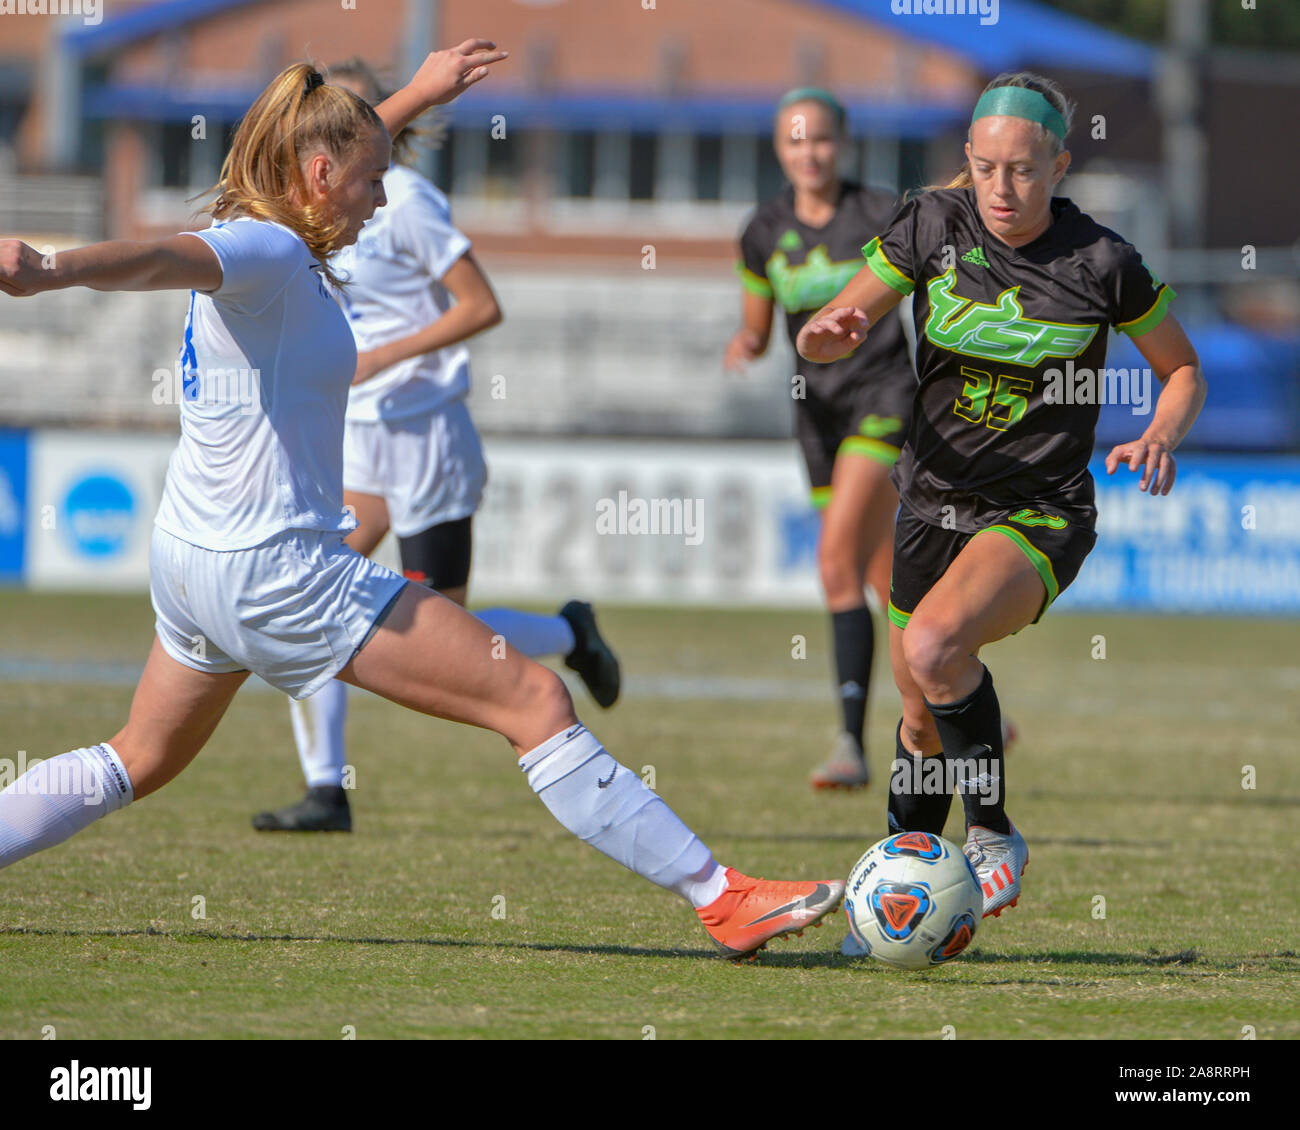 Memphis, TN, USA. 10th Nov, 2019. South Florida forward, Sydny Nasello (35), in action during the NCAA Women's Soccer Championship match between the University of South Florida Bulls and the University of Memphis Tigers at The University of Memphis in Memphis, TN. Kevin Langley/Sports South Media/CSM/Alamy Live News Stock Photo